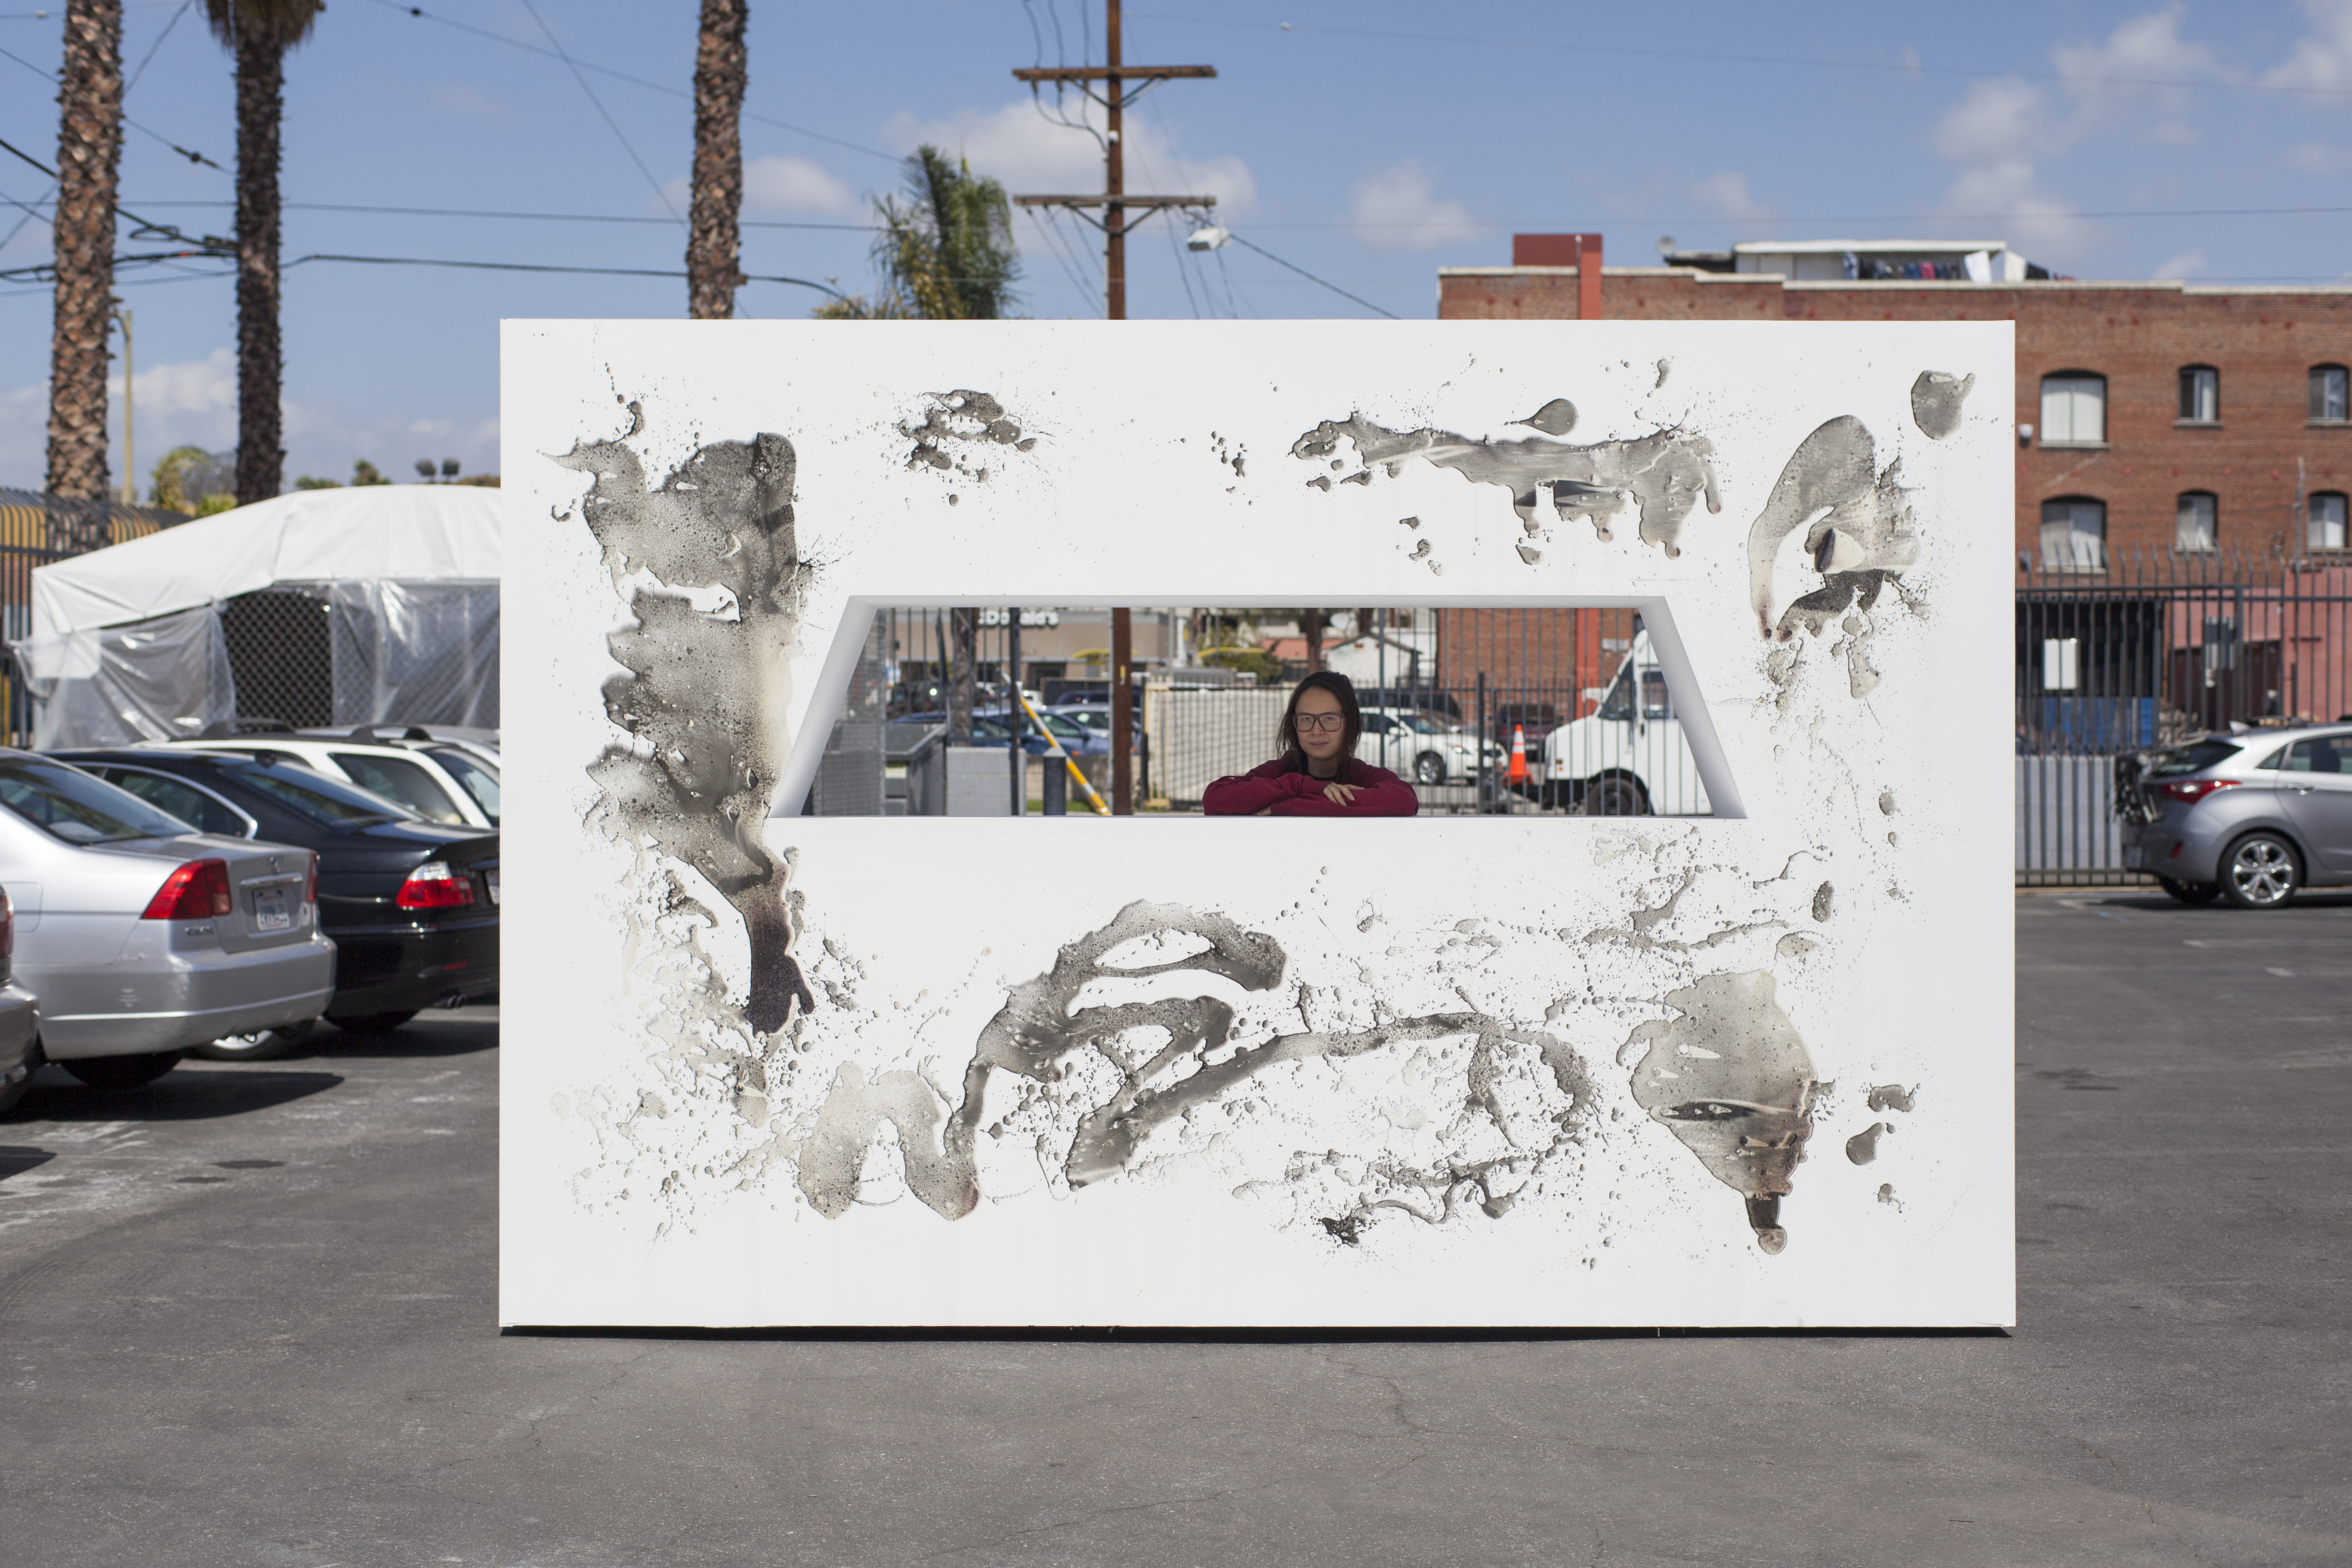 Kelly Akashi. Photo by Cayetano Ferrer courtesy artist and Ghebaly Gallery, Los Angeles.